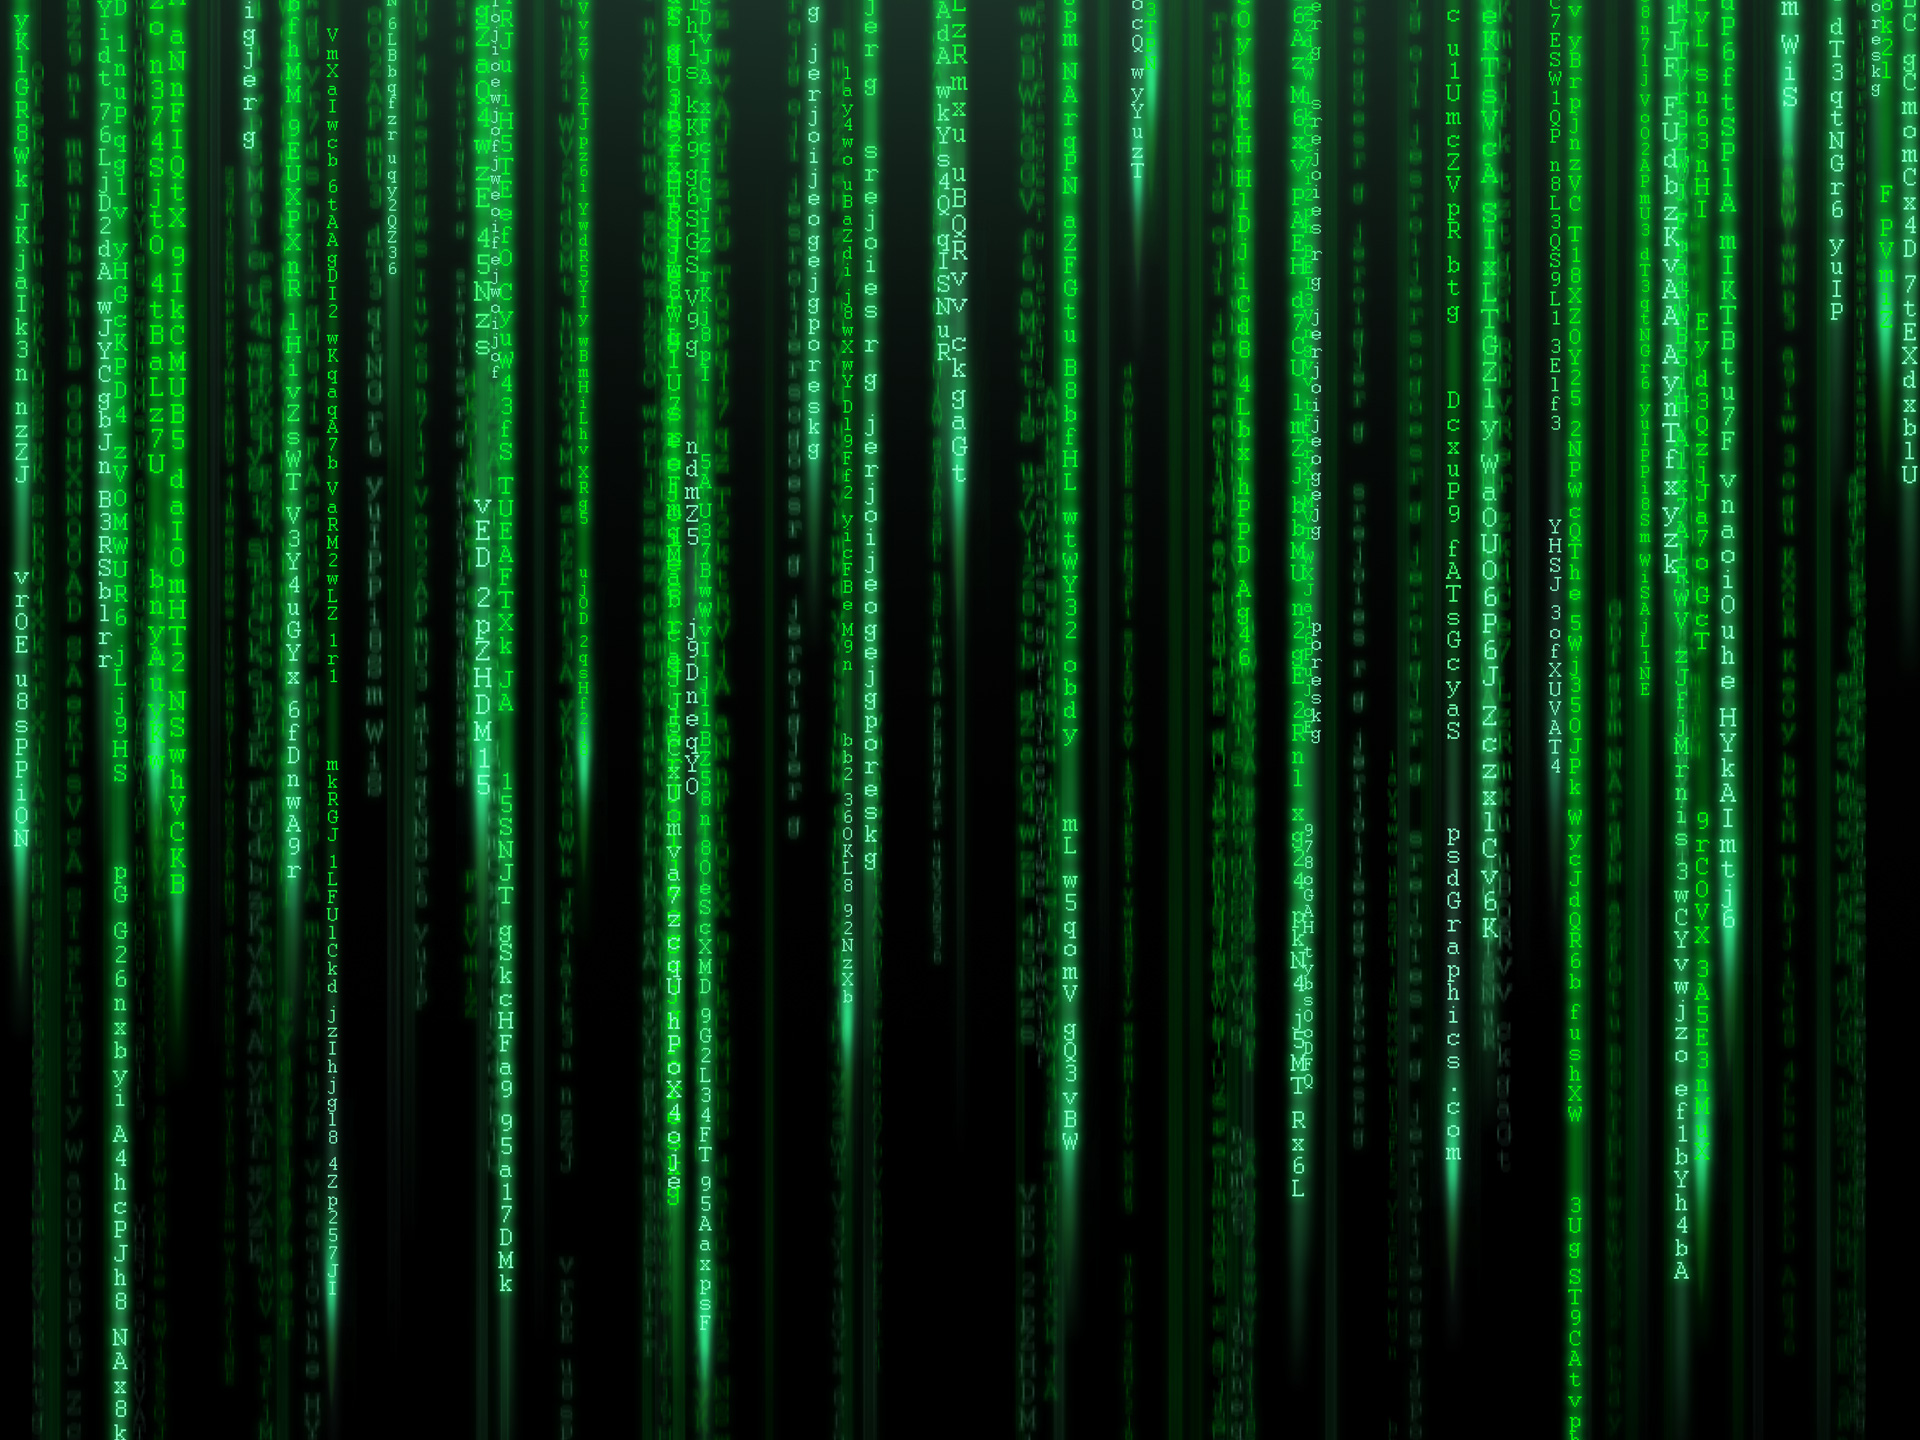 Free download Matrix wallpaper 19201440 [1920x1440] for your ...